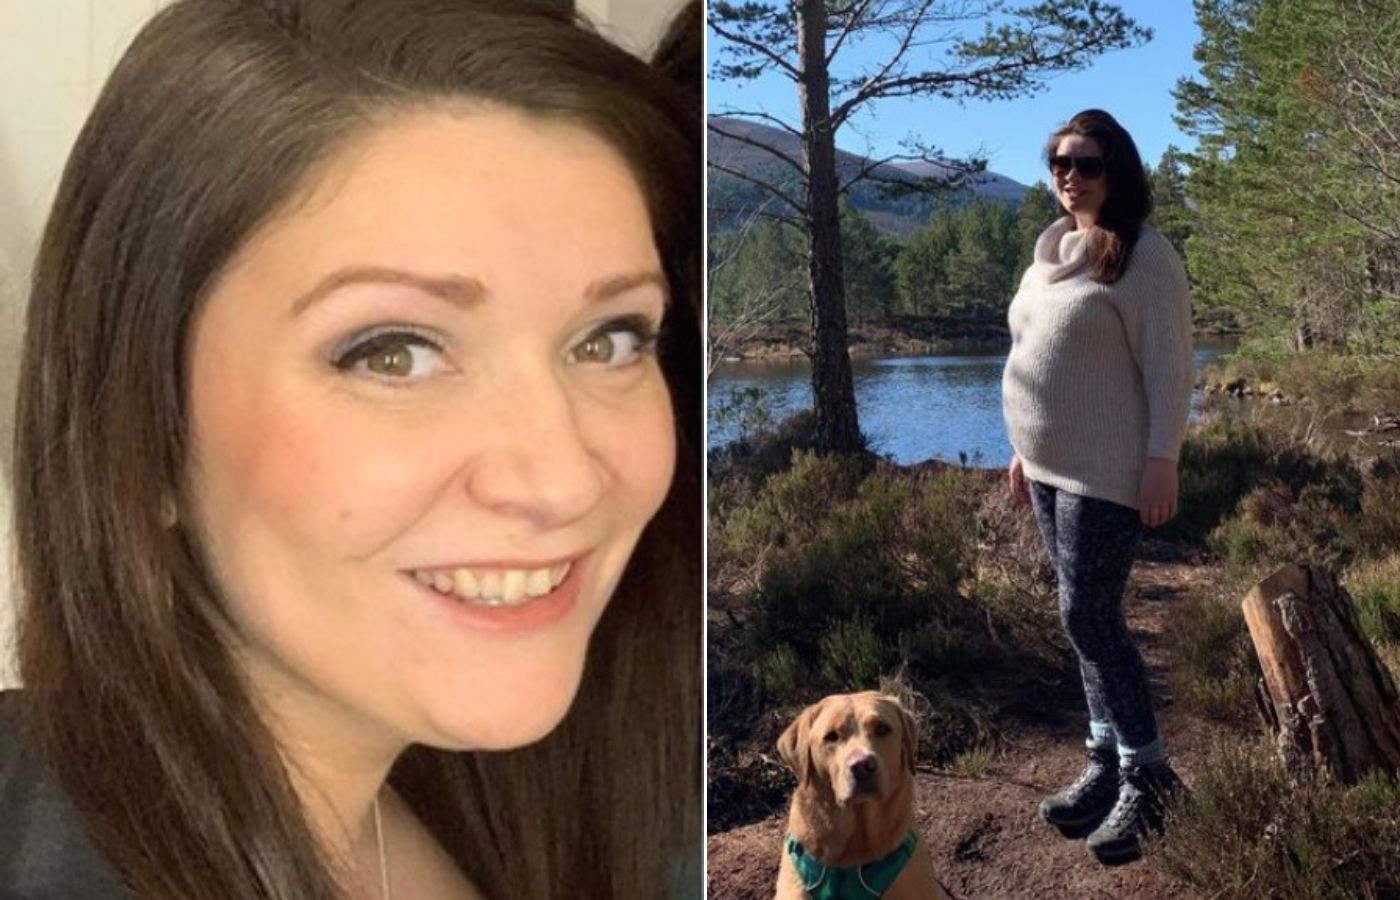 Marelle Sturrock was 29 weeks pregnant at the time of her death and her unborn baby did not survive.